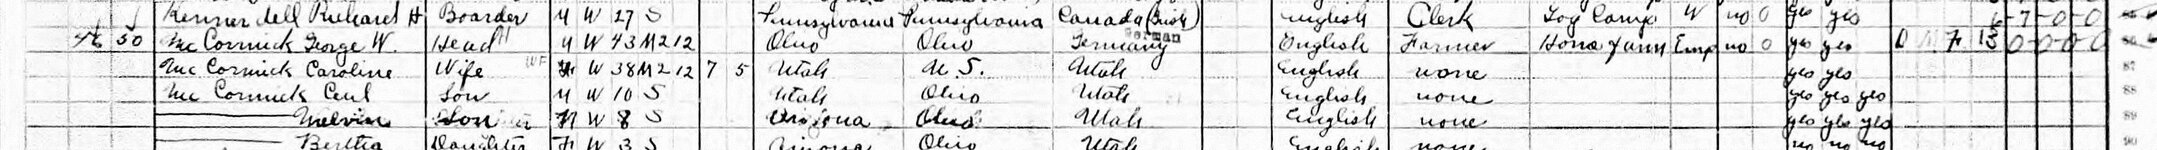 George and Melvin mc cormack 1910 census S.jpg